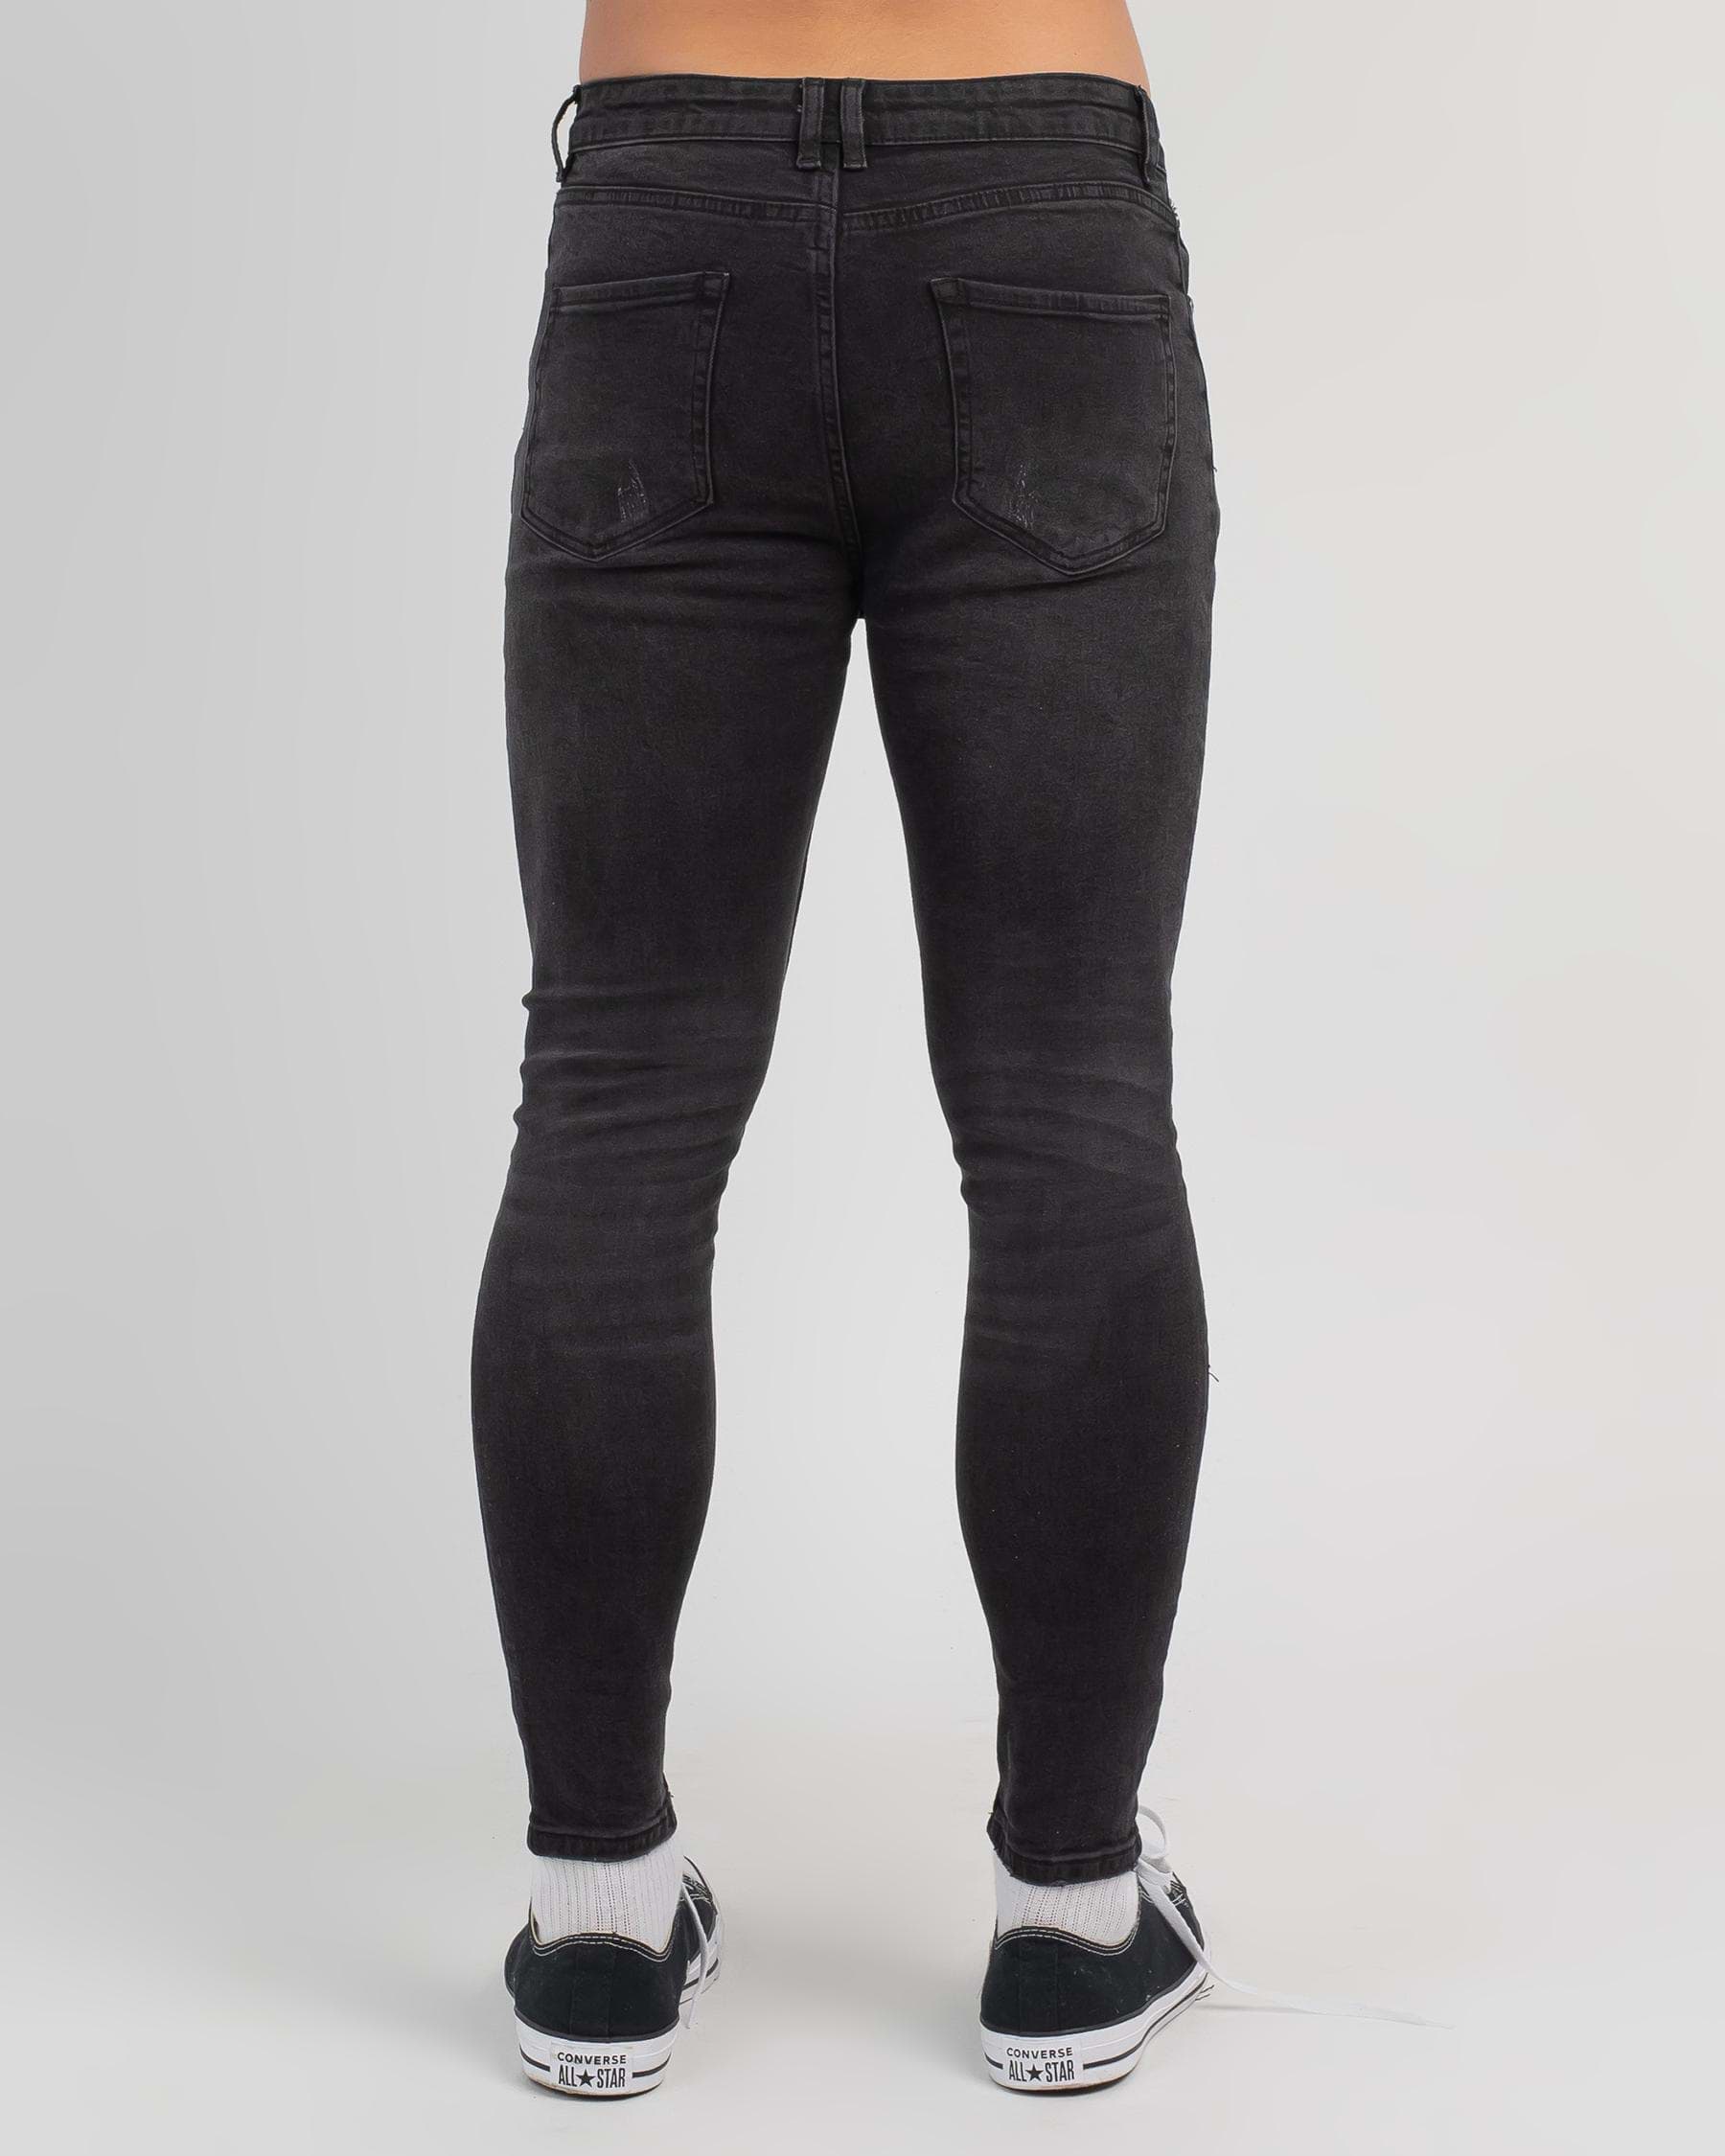 Lucid Operator Jeans In Washed Black - Fast Shipping & Easy Returns ...